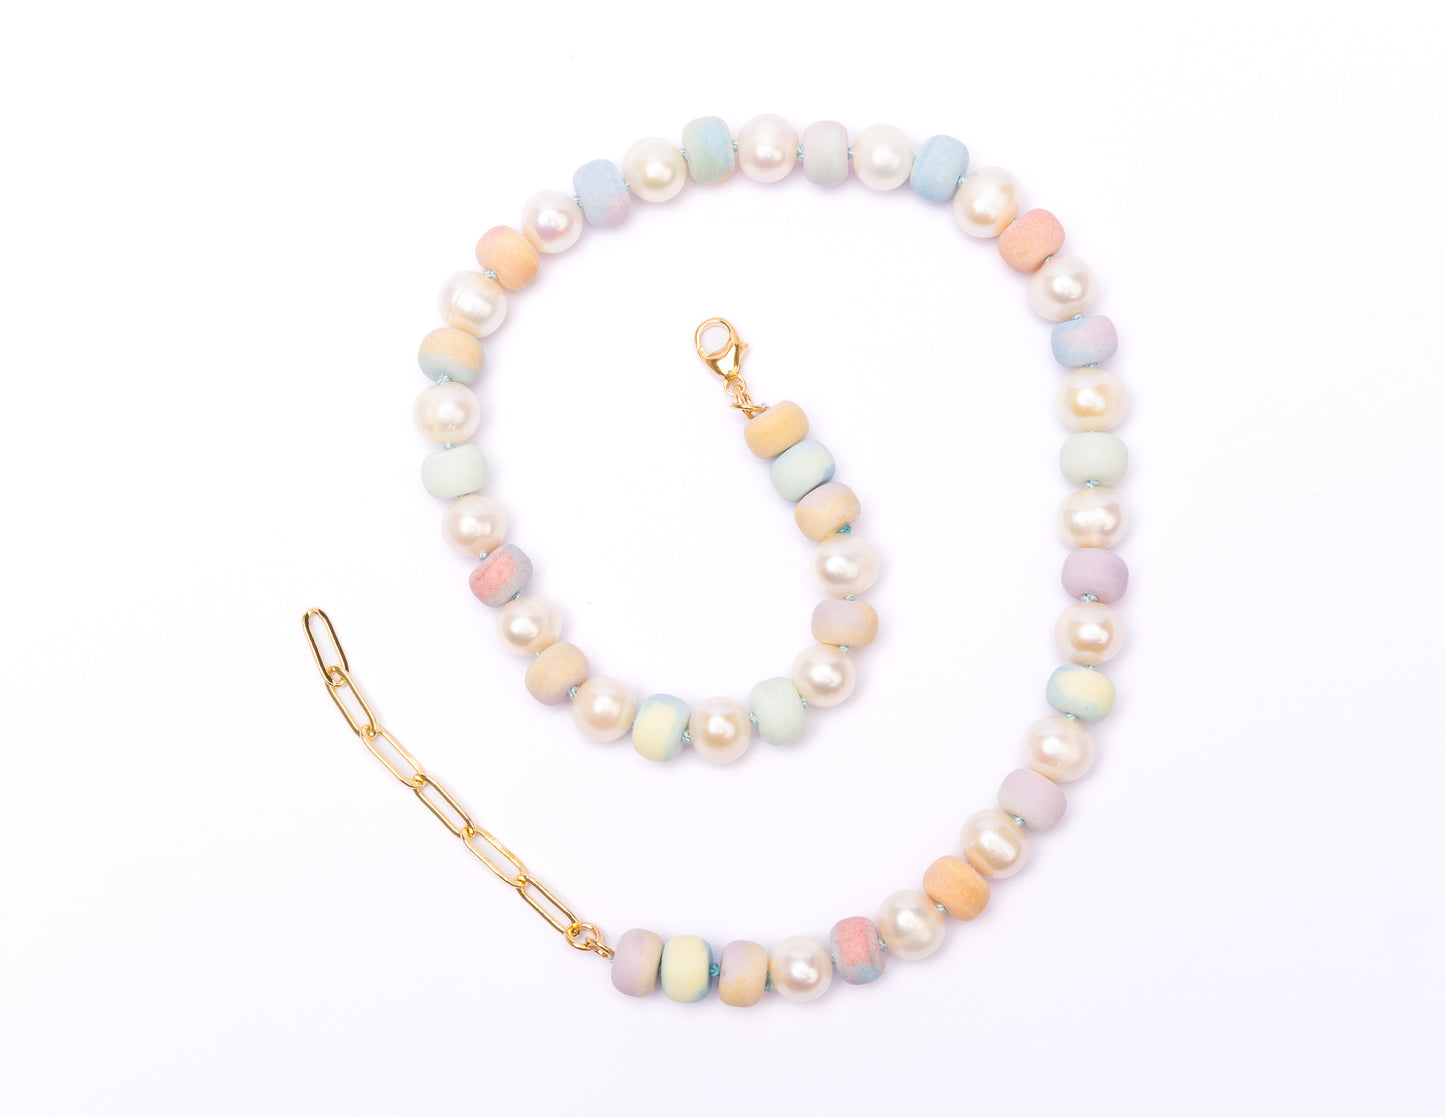 Retro *Matte* Ombré Pastel Rainbow + Freshwater Pearl Tie Dyed Gemstone Candy Necklace